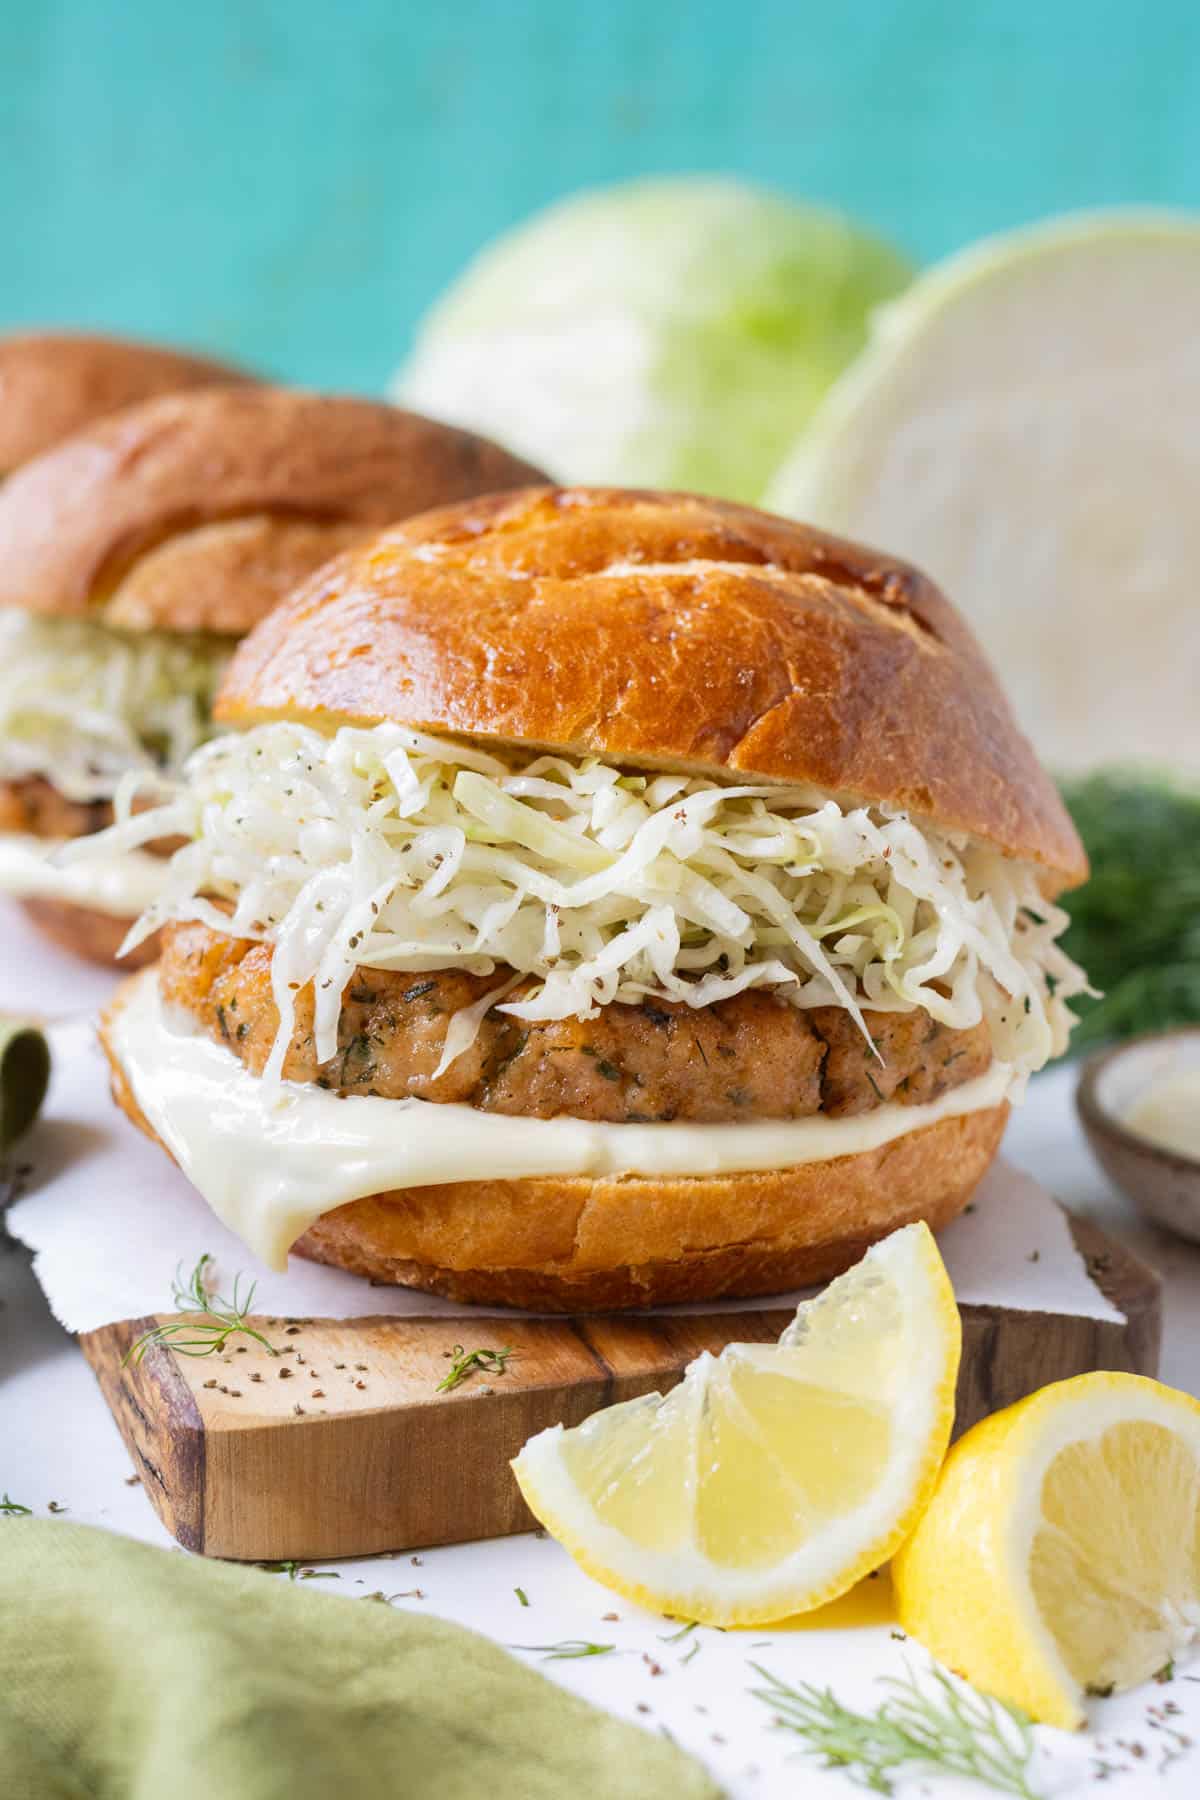 Salmon burger patties with a vinegar-based coleslaw on toasted sweet buns with lemon wedges next to it.